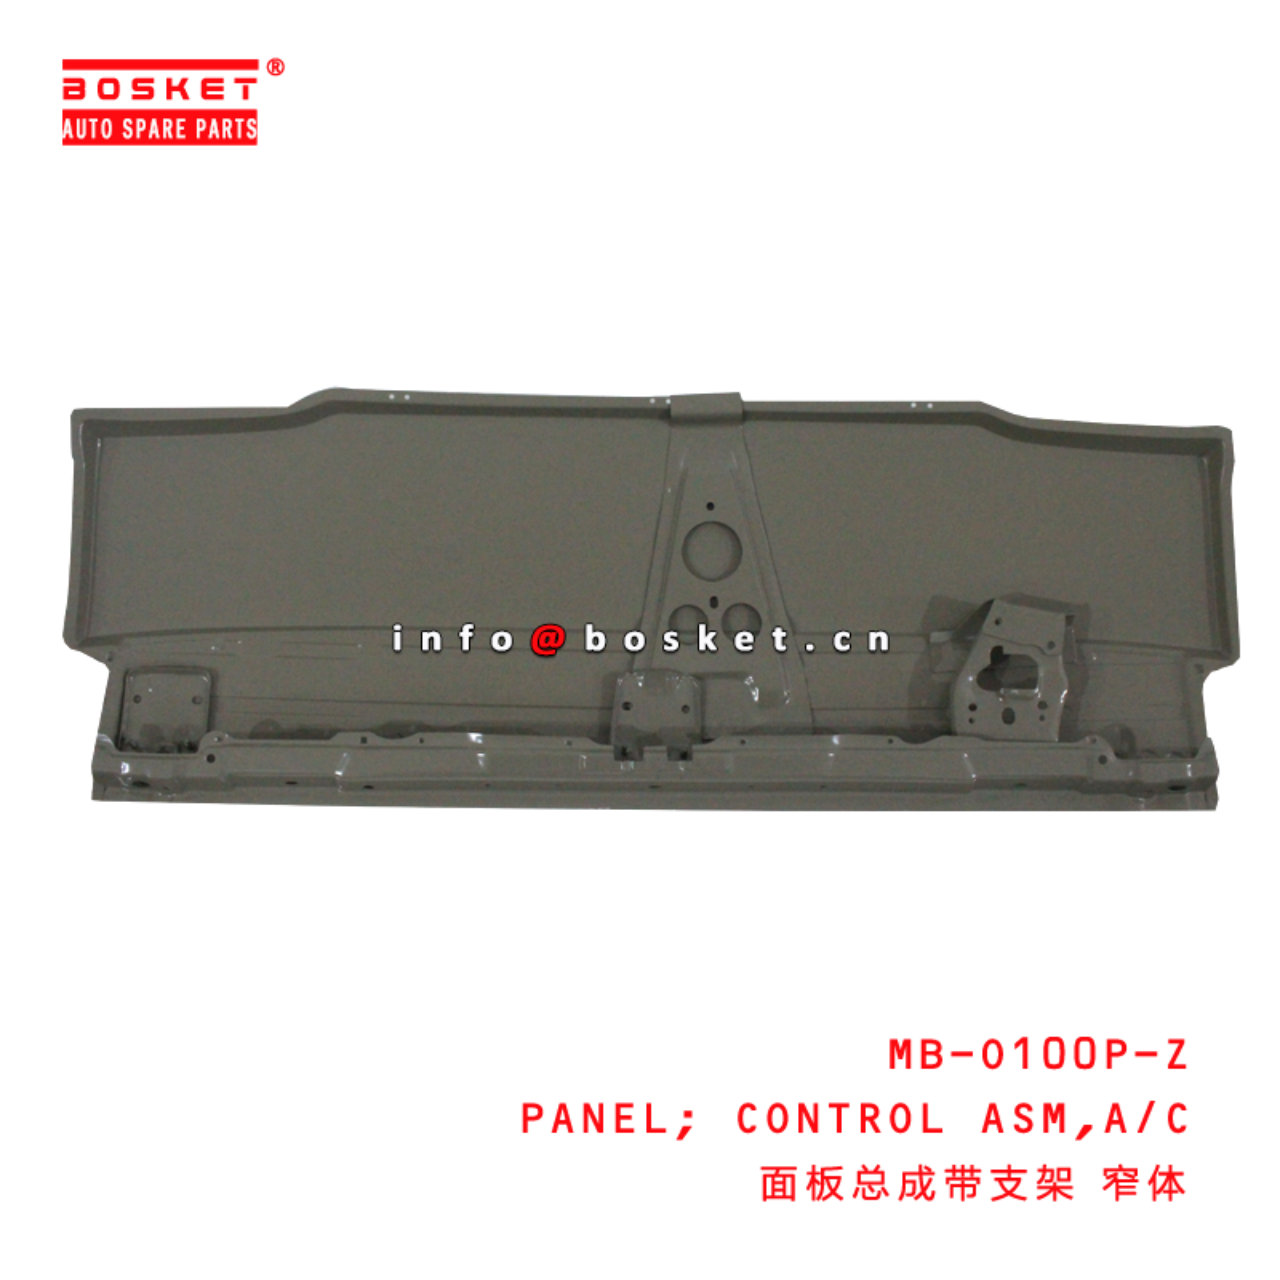 MB-O100P-Z Air Compression CONTROL Assembly PANEL suitable for ISUZU 100P老款 MB-O100P-Z